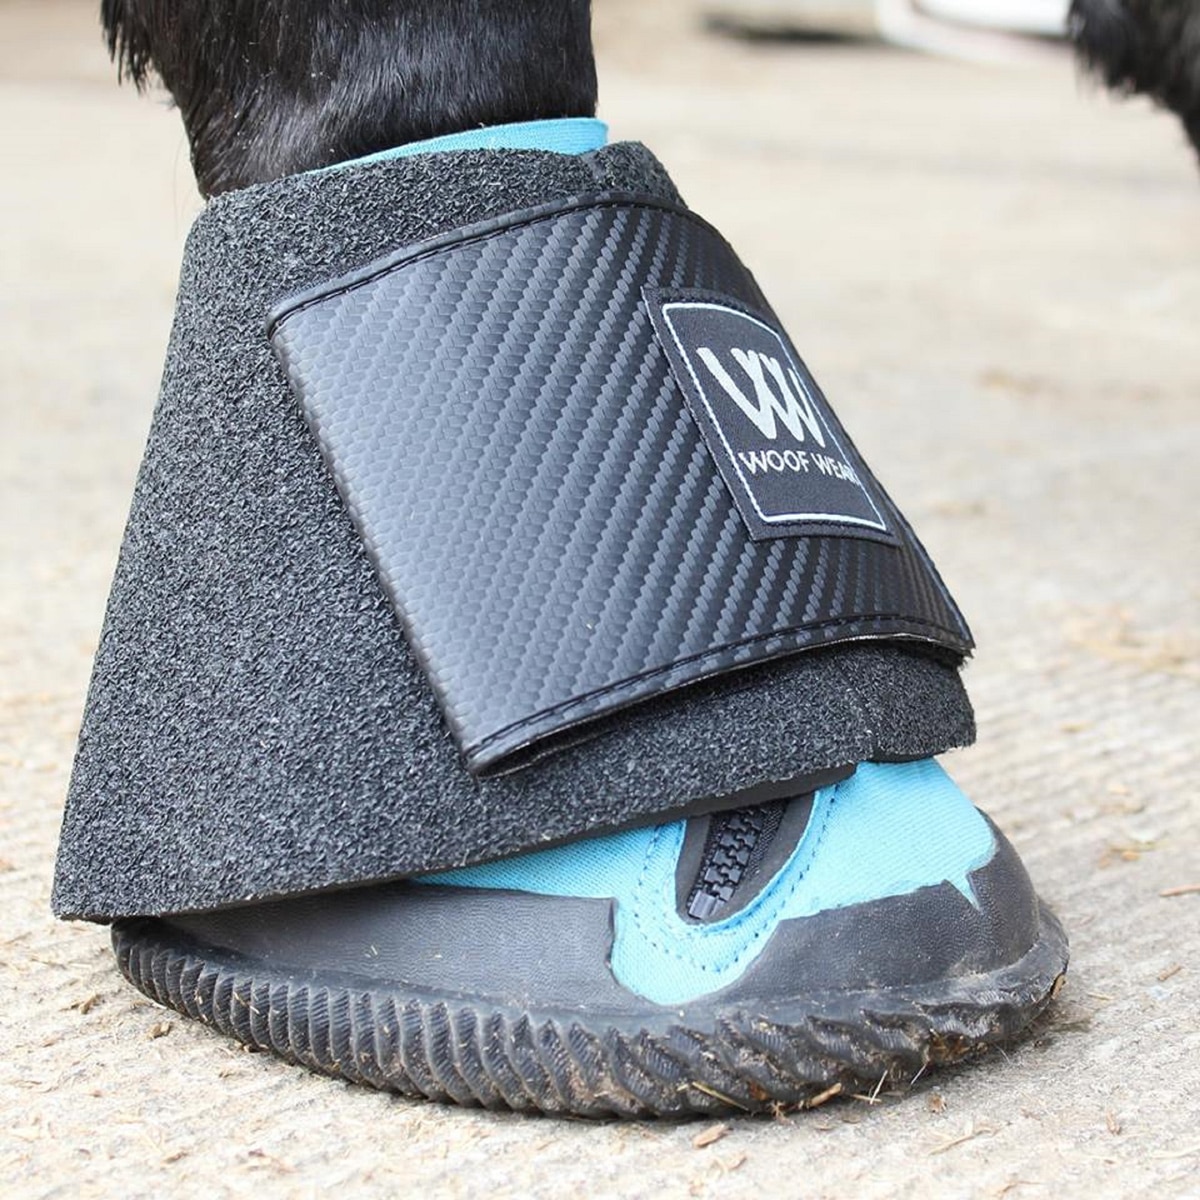 Woof Wear Mud Fever Turnout Boots 